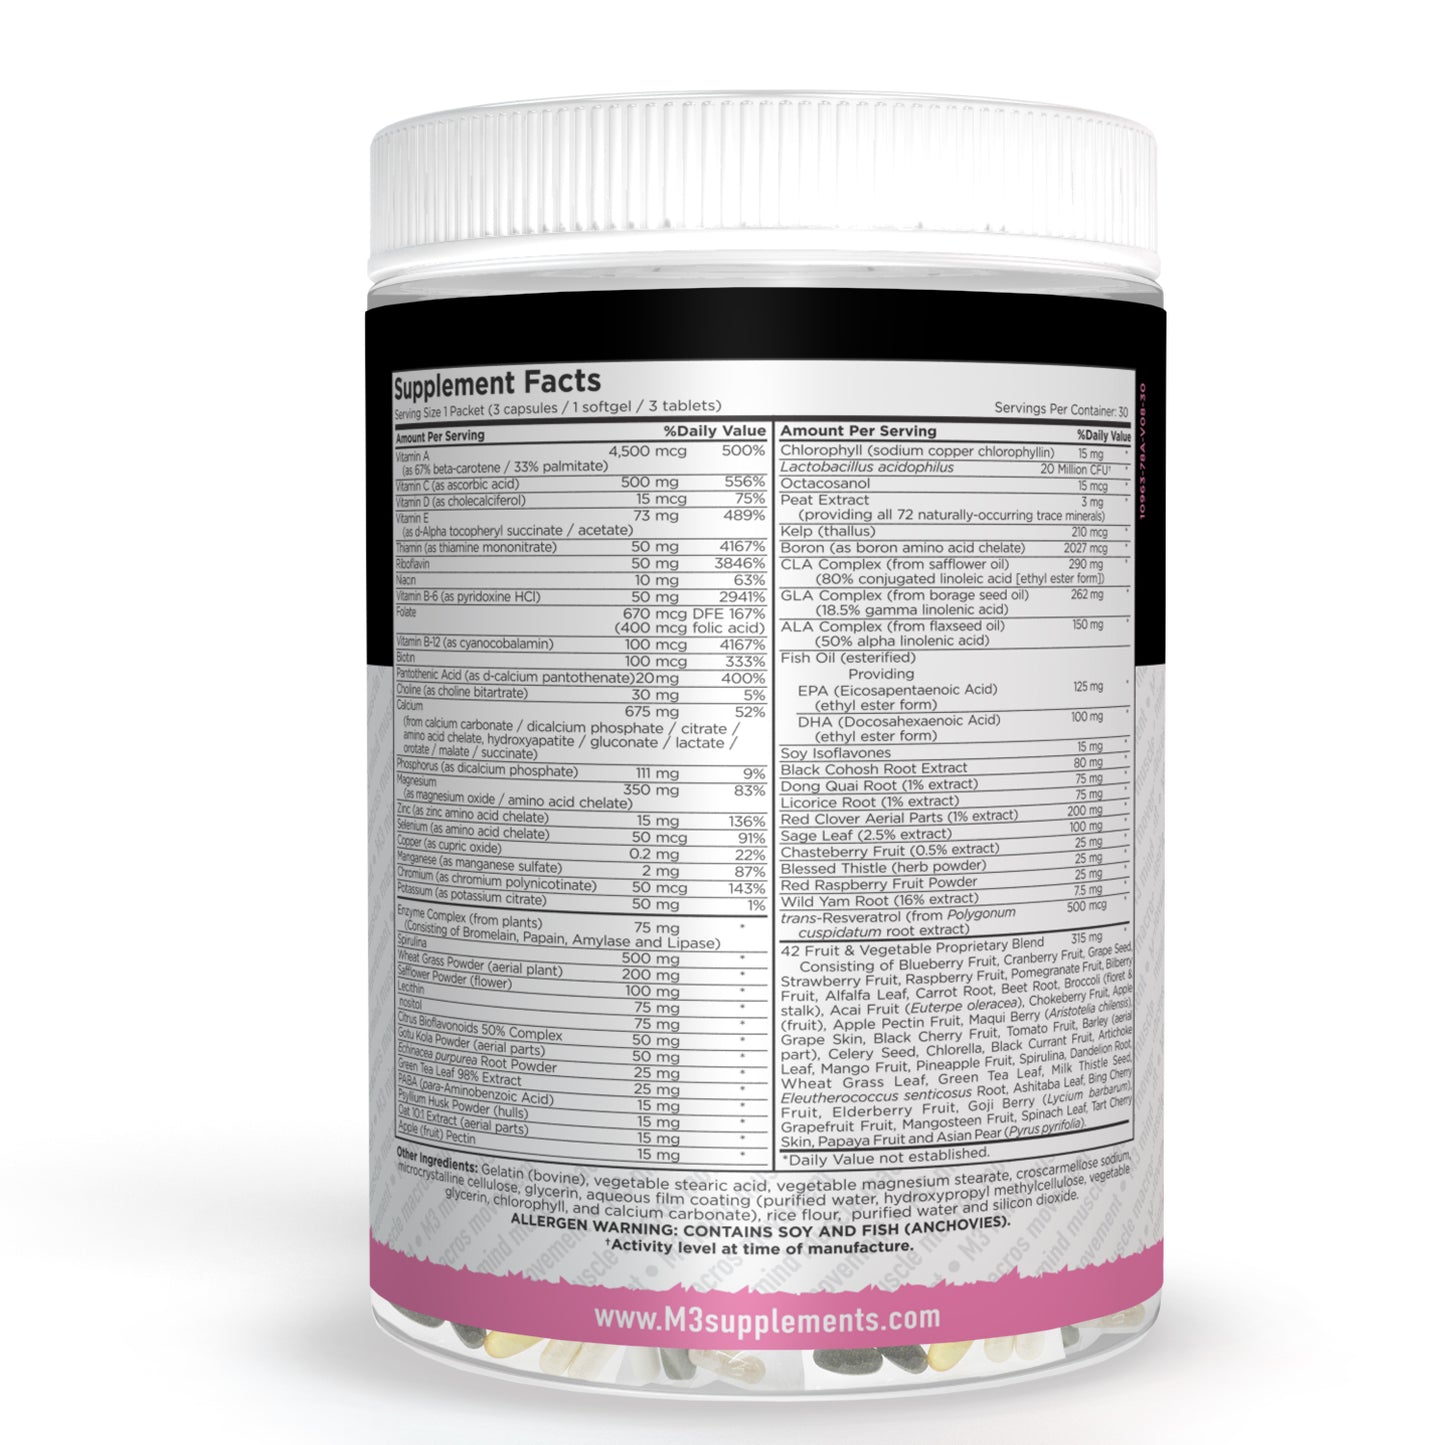 M3 Supplements Company provides the Ultimate Womens Daily Pack. Mutivitamin and Mineral complex. Promotes overall well-being, Immune Sysytem Health, and muscle health.